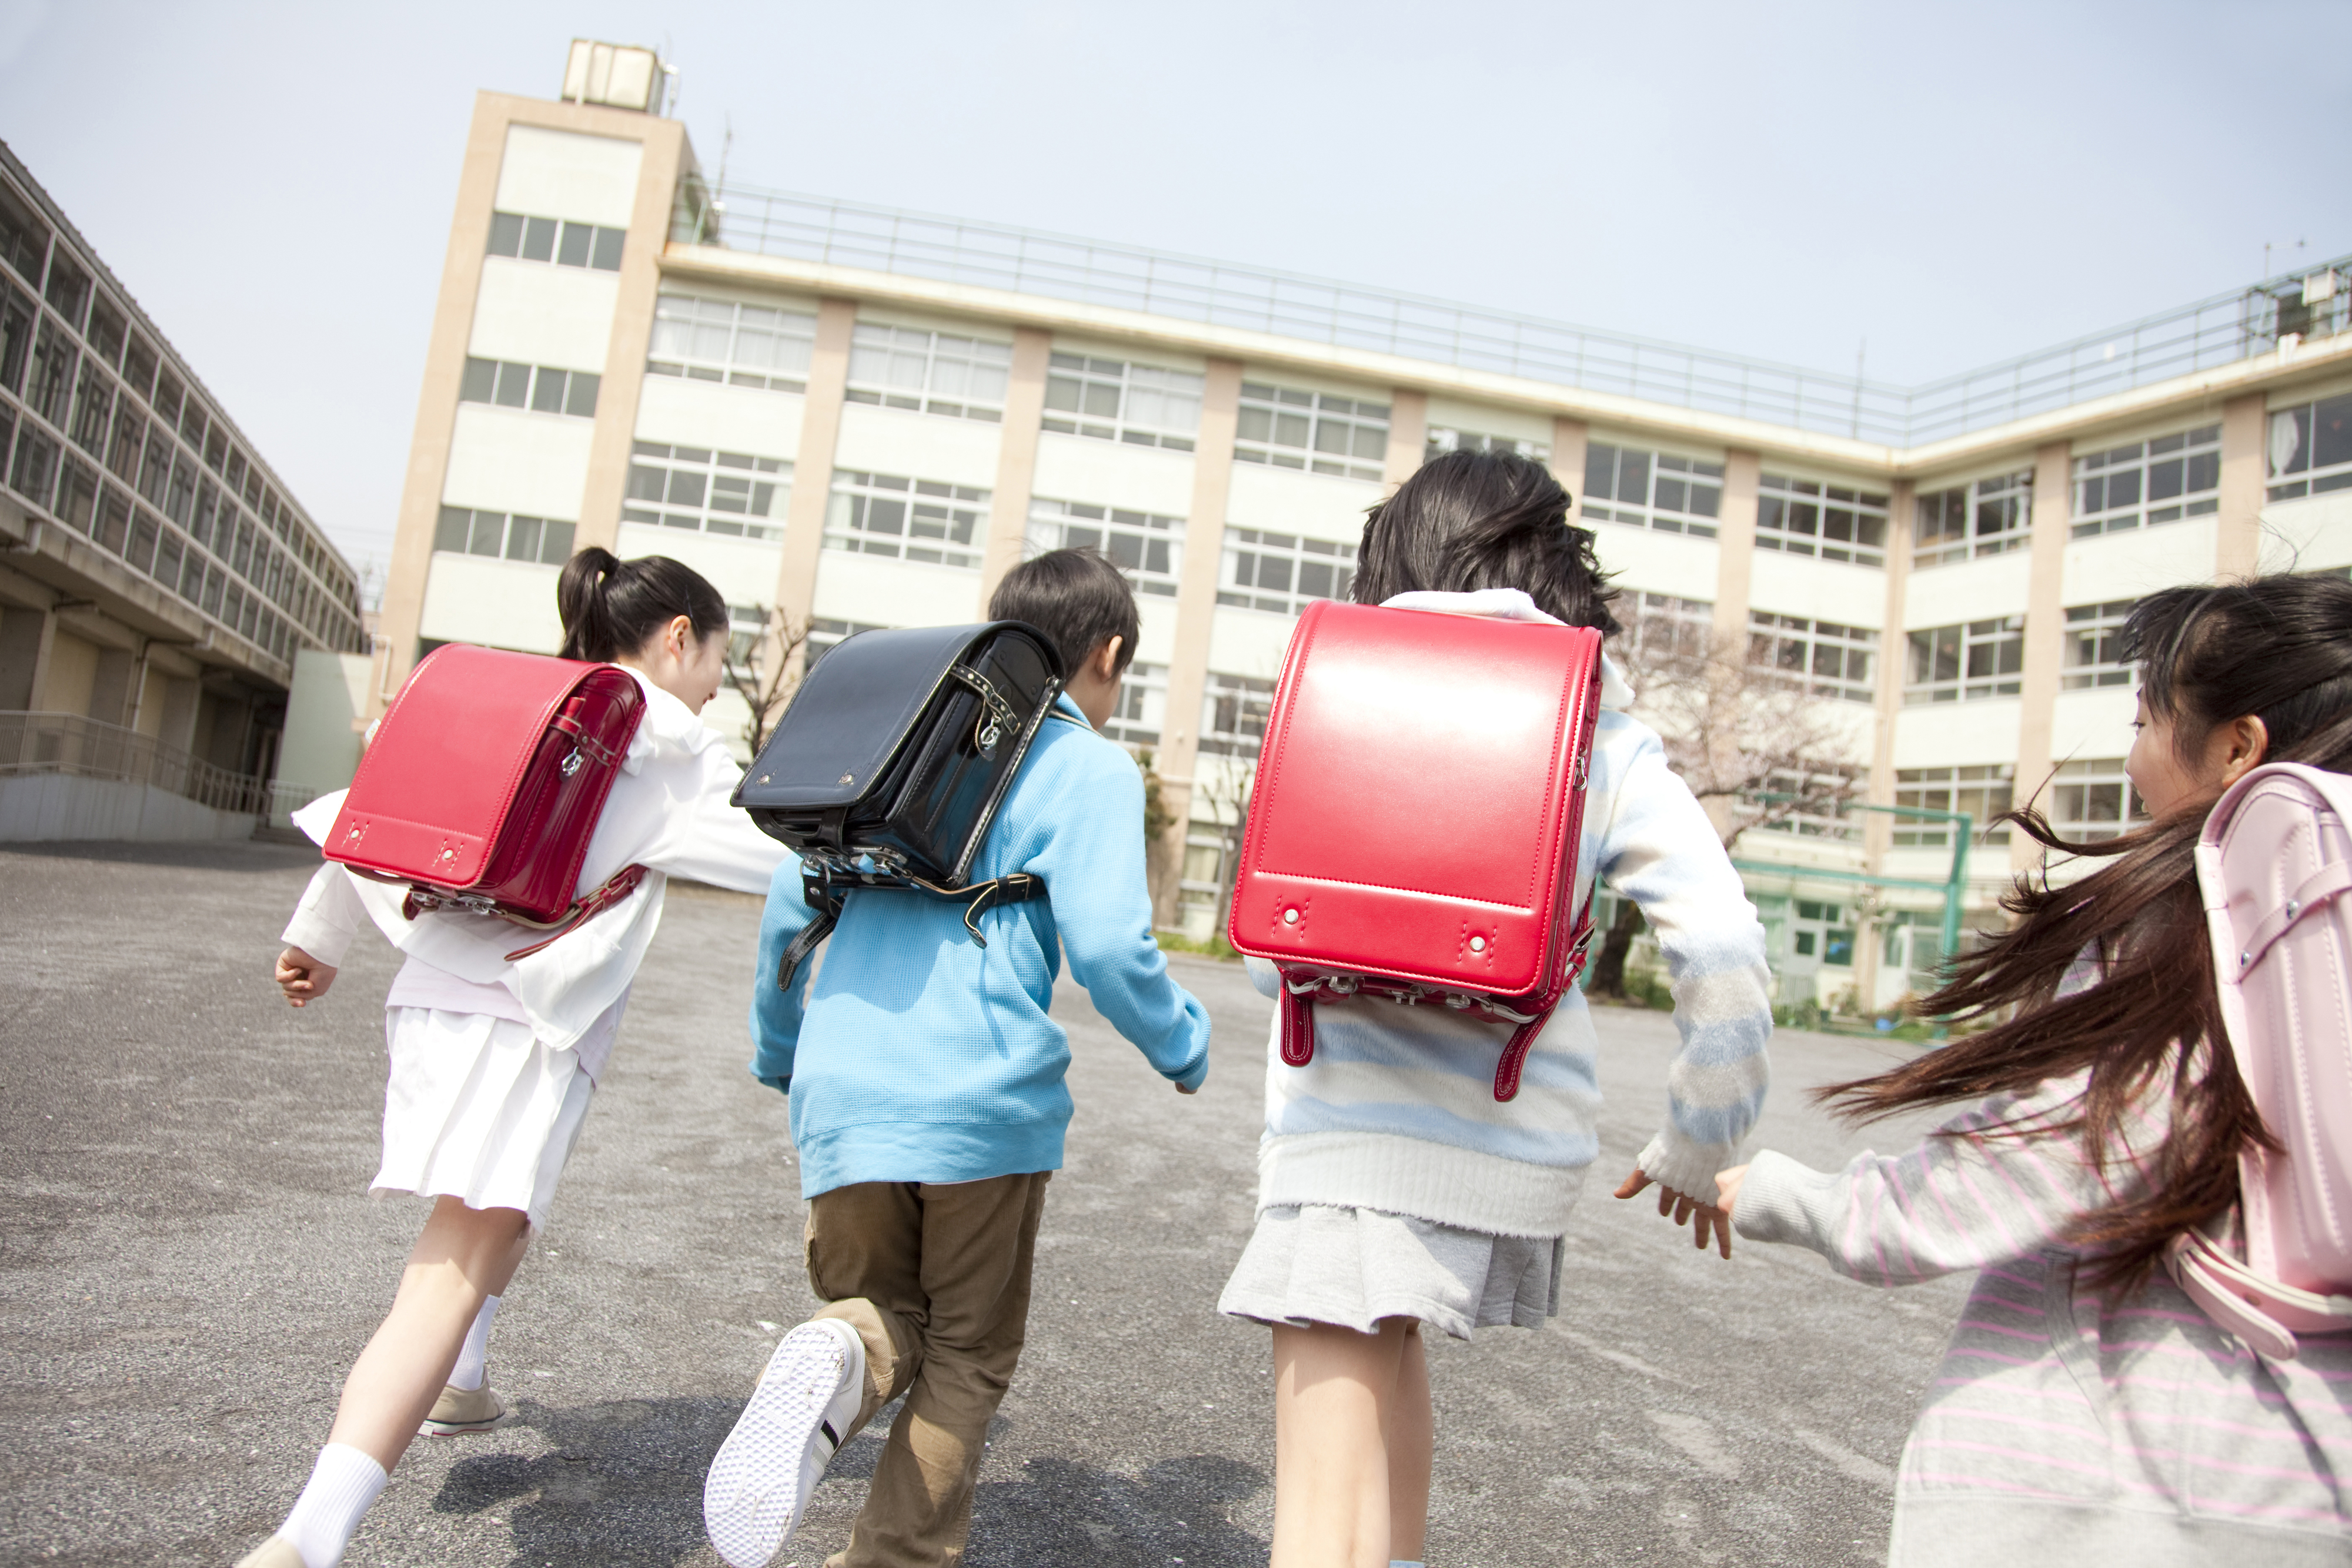 Four students with backpacks running joyfully in a schoolyard